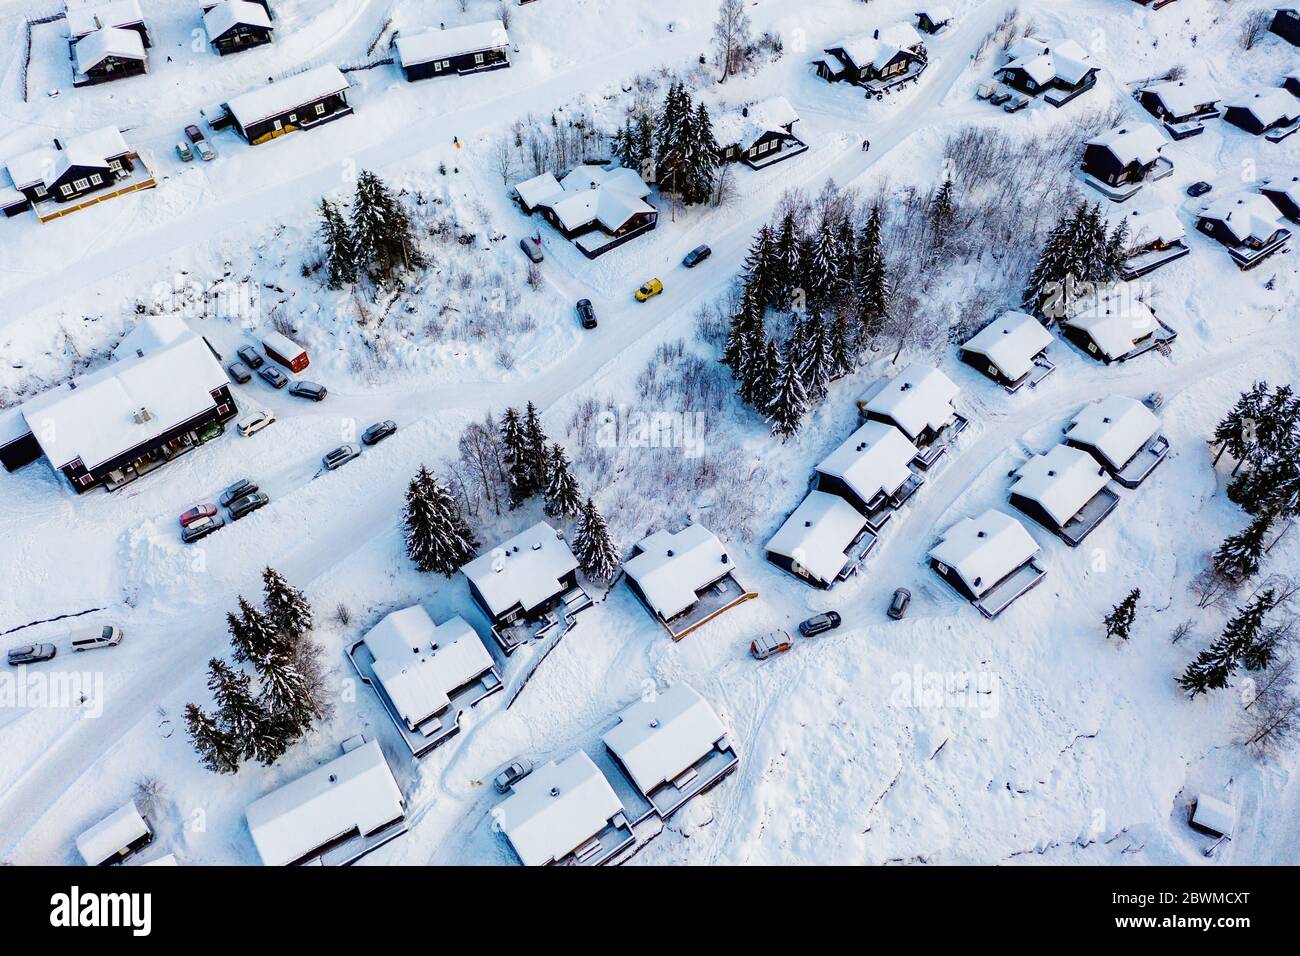 Hafjell, Norway. Aerial view of ski resort Hafjell in Norway with houses in winter with mountains Stock Photo